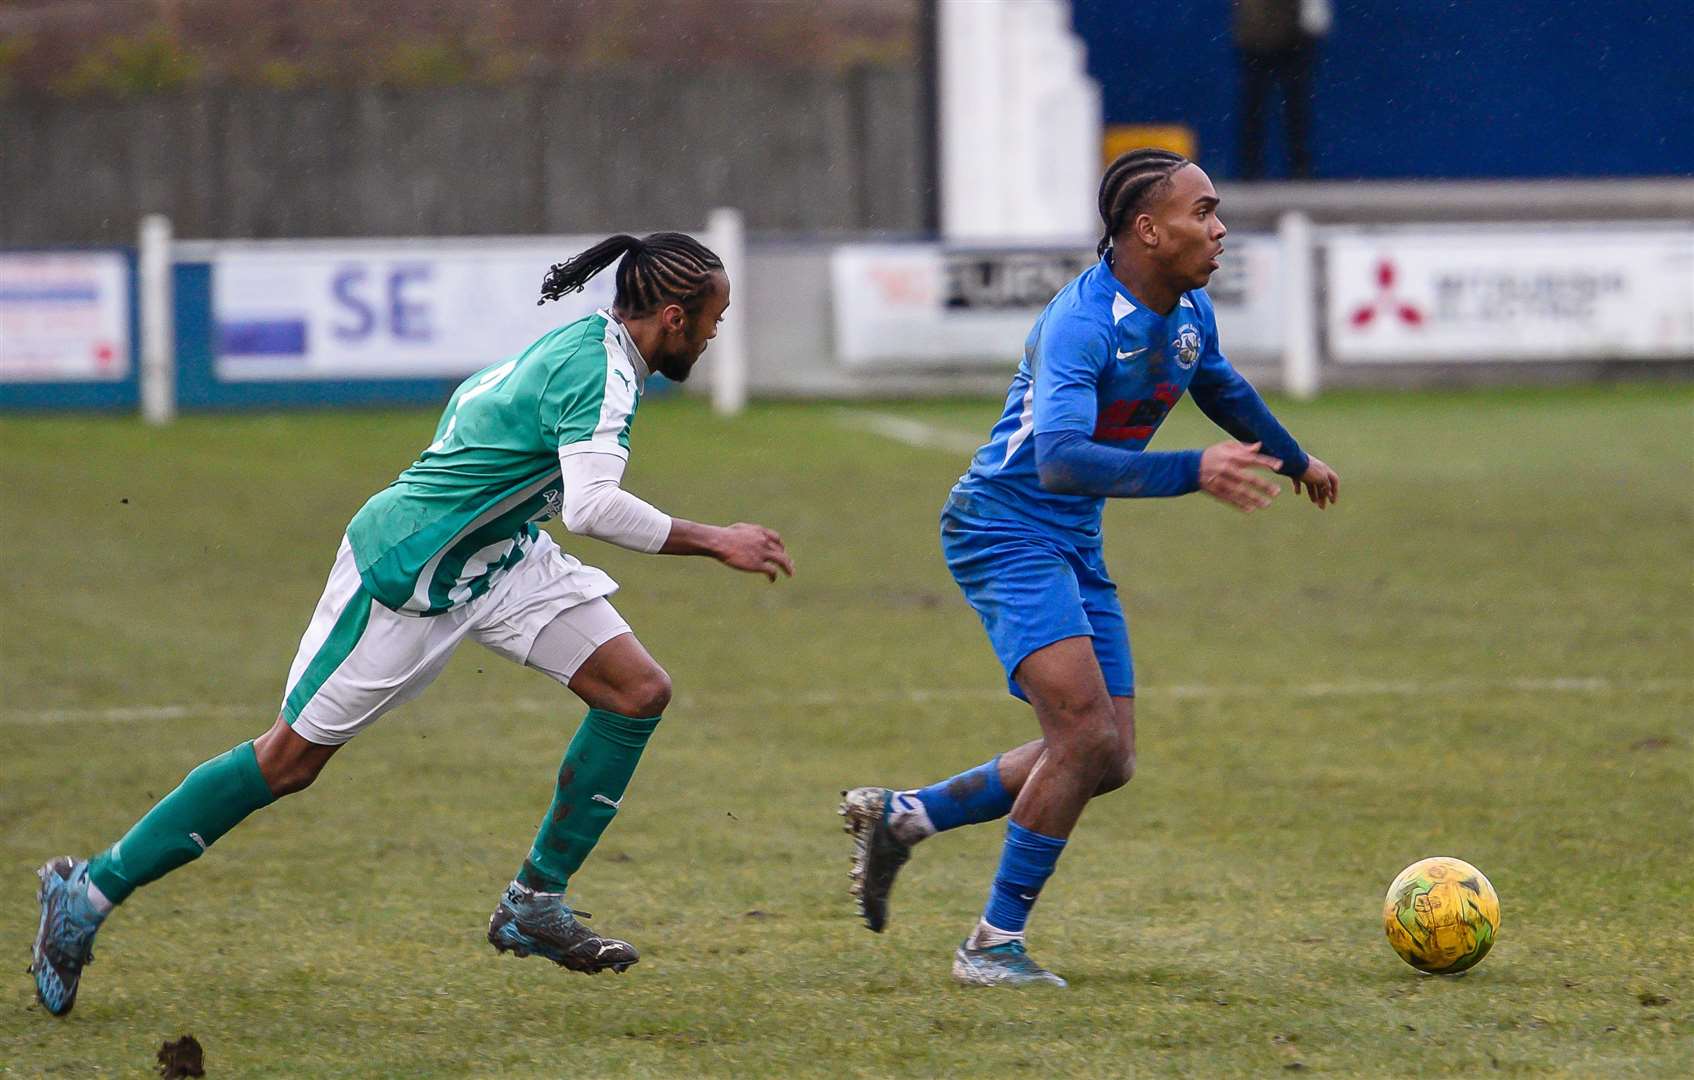 Tushaun-Tyrese Walters, pictured on the right in 2020, is back on loan at Herne Bay from Maidstone and scored in their midweek win over Lewes. Picture: Alan Langley